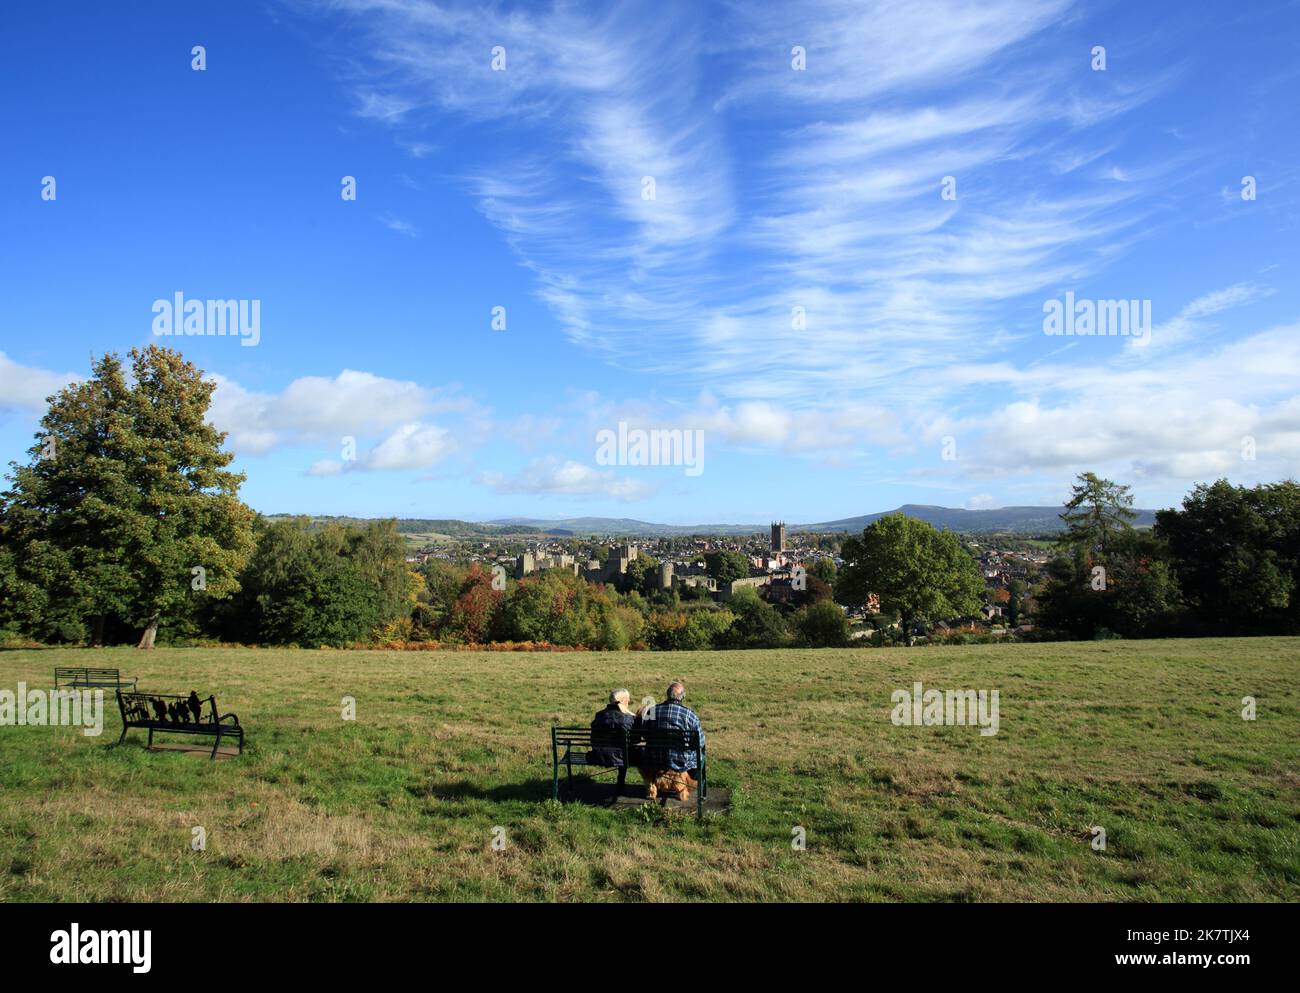 People enjoying the view of Ludlow town and castle from Whitcliffe common nature reserve, Shropshire, England, UK. Stock Photo